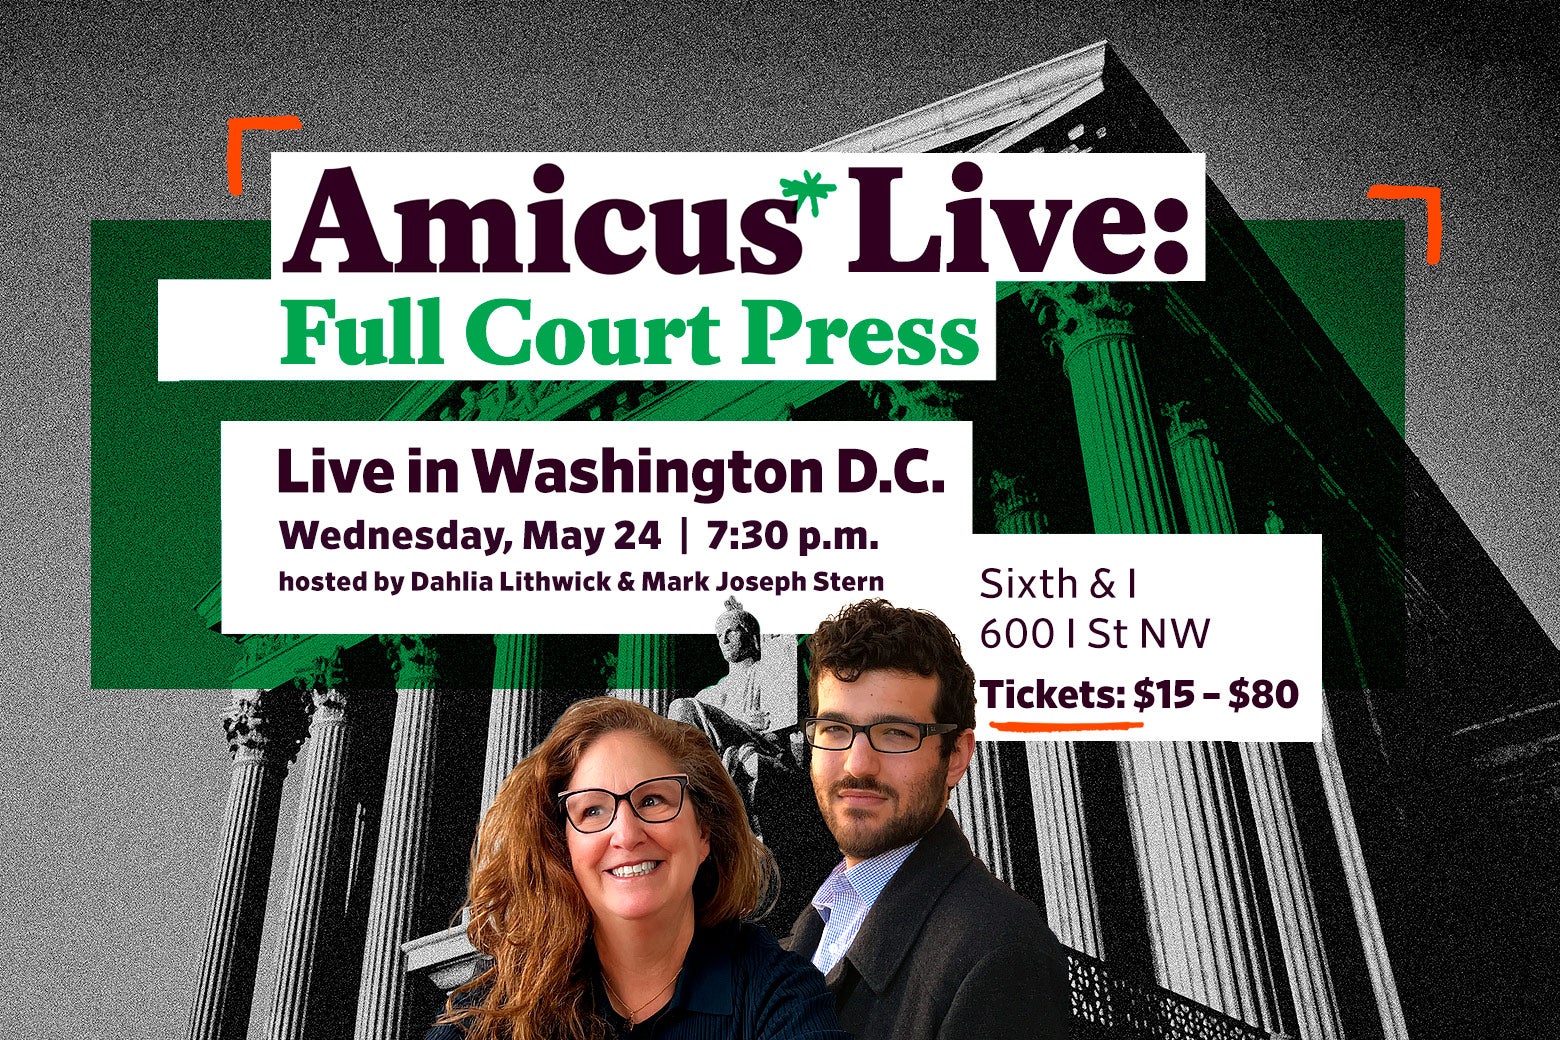 A flyer depicting the exterior of the Supreme Court and advertising Amicus Live at Sixth & I in Washington, D.C.